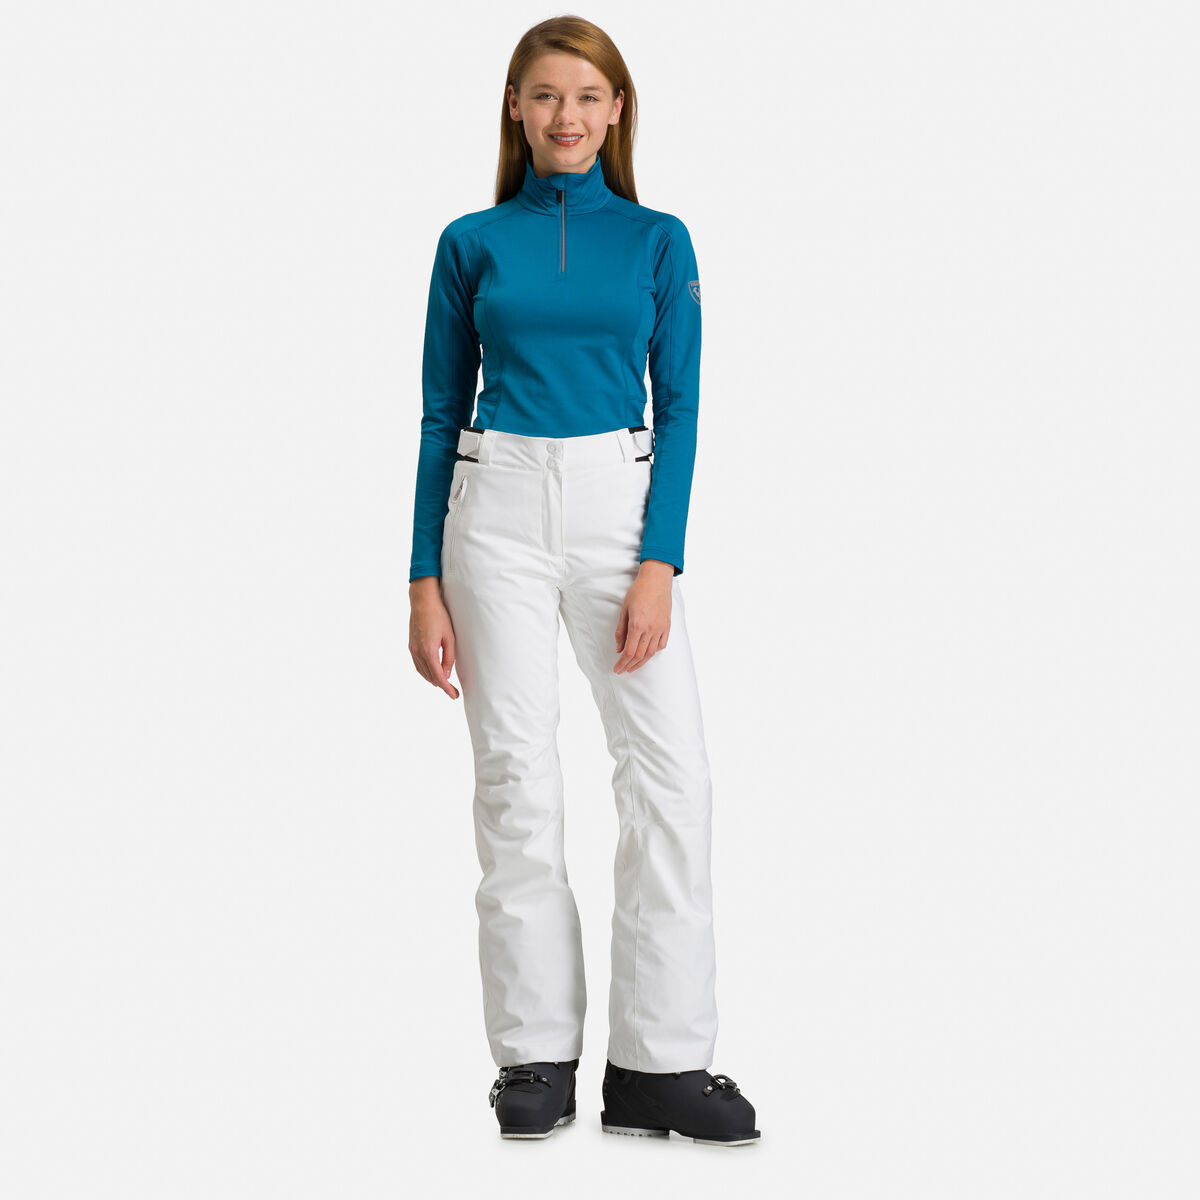 Ski Pants For Women - Polyester - White - Pink - 5 Colors - 3 Sizes from  Apollo Box